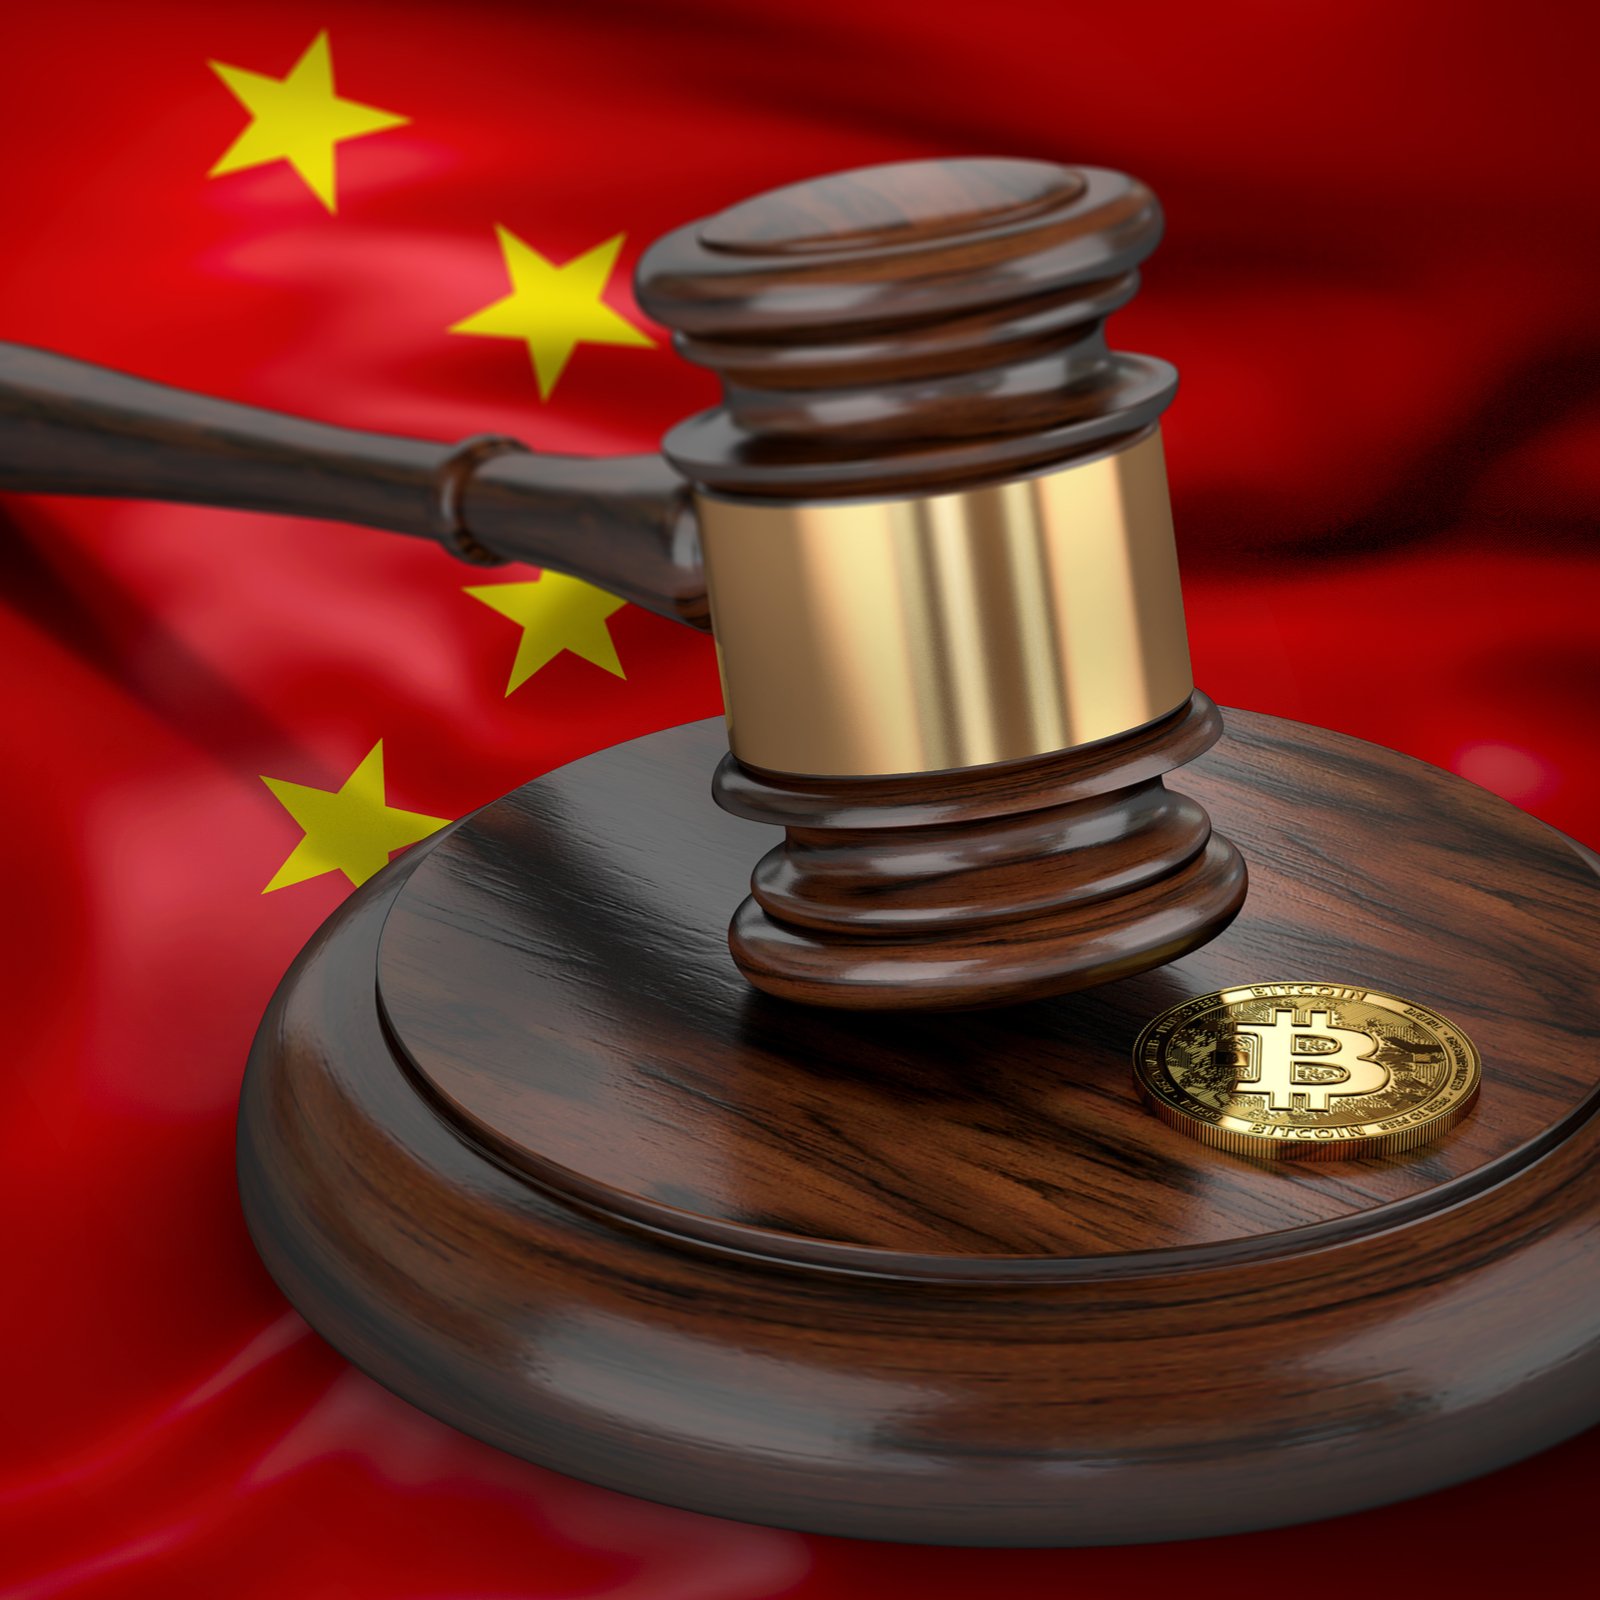 Regulations Roundup: Shenzhen Court Recognizes Bitcoin, Motion to Dismiss Coinbase Case Granted